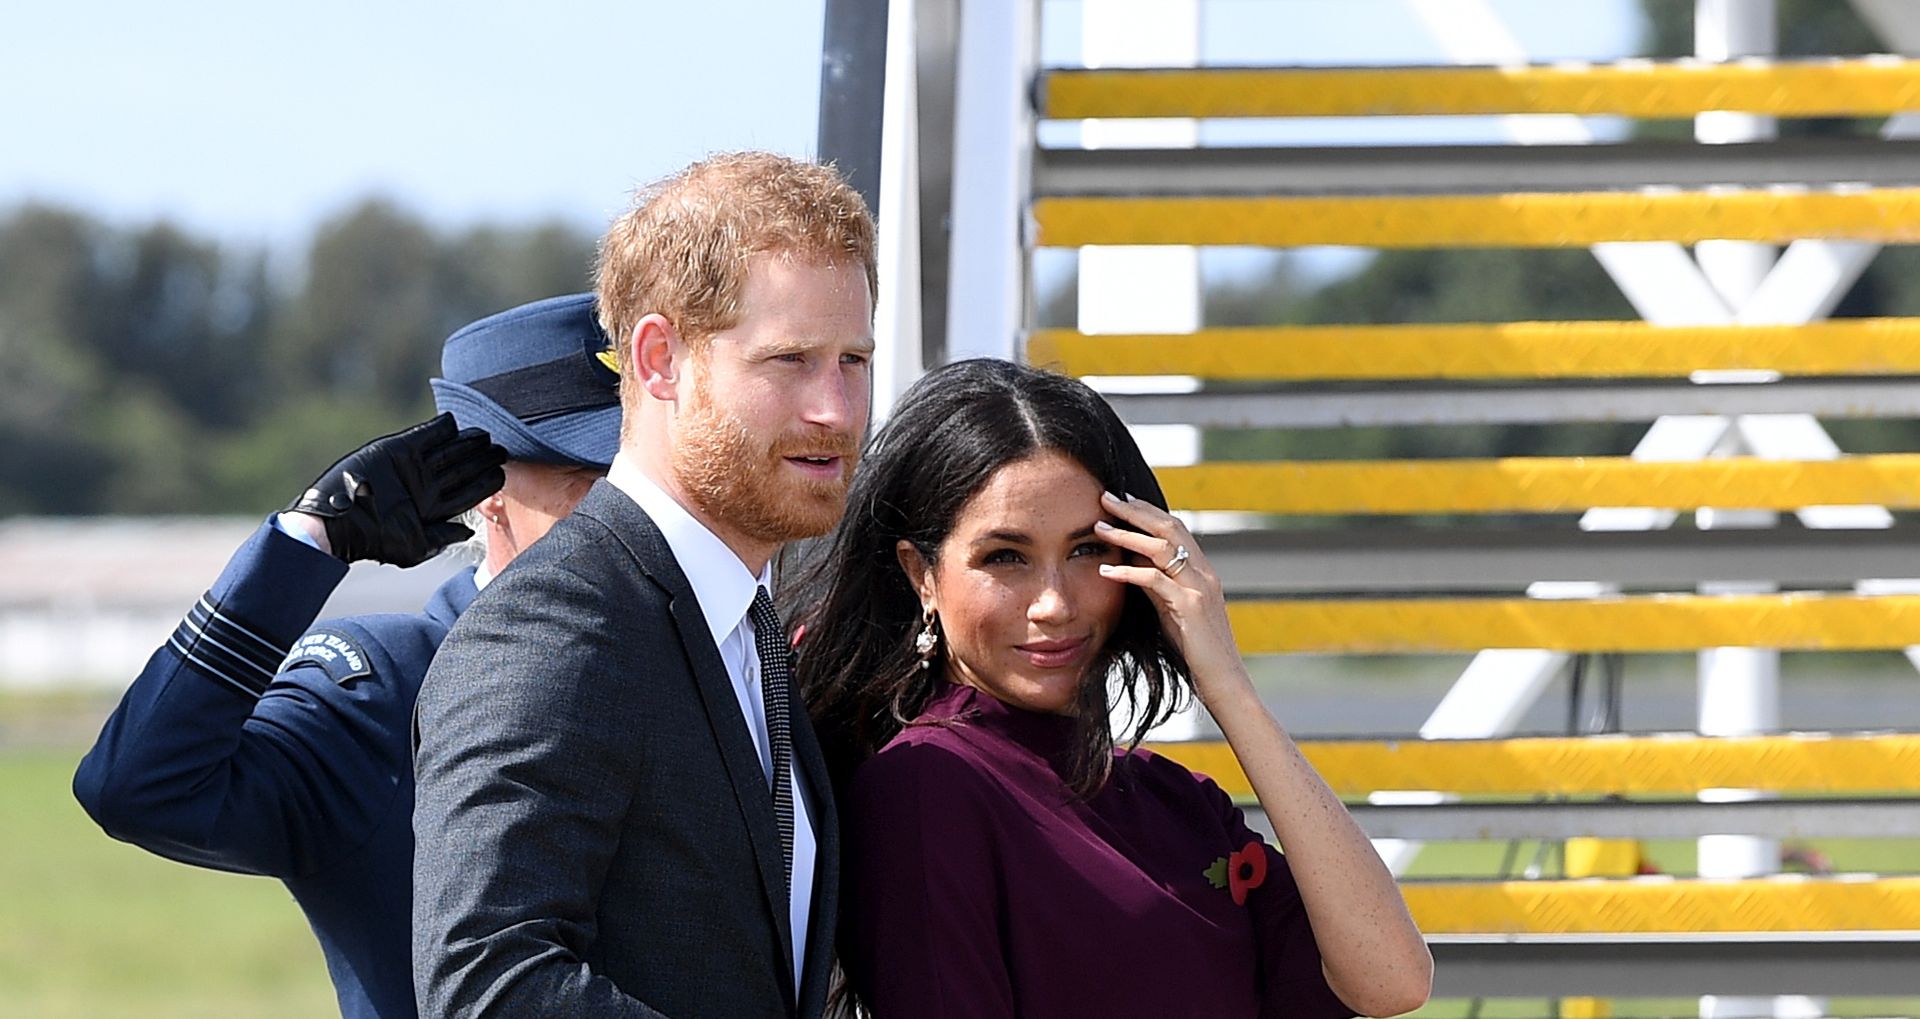 epa07125467 Britain's Prince Harry (C), the Duke of Sussex and his wife Meghan (R), the Duchess of Sussex board a Royal New Zealand Air Force aircraft in Sydney, Australia, 28 October 2018. The Duke and Duchess of Sussex are on a three-week tour of Australia, New Zealand, Tonga, and Fiji and visited Sydney for the 2018 Invictus Games, an Olympic-style event for disabled and ill service people.  EPA/JOEL CARRETT  AUSTRALIA AND NEW ZEALAND OUT